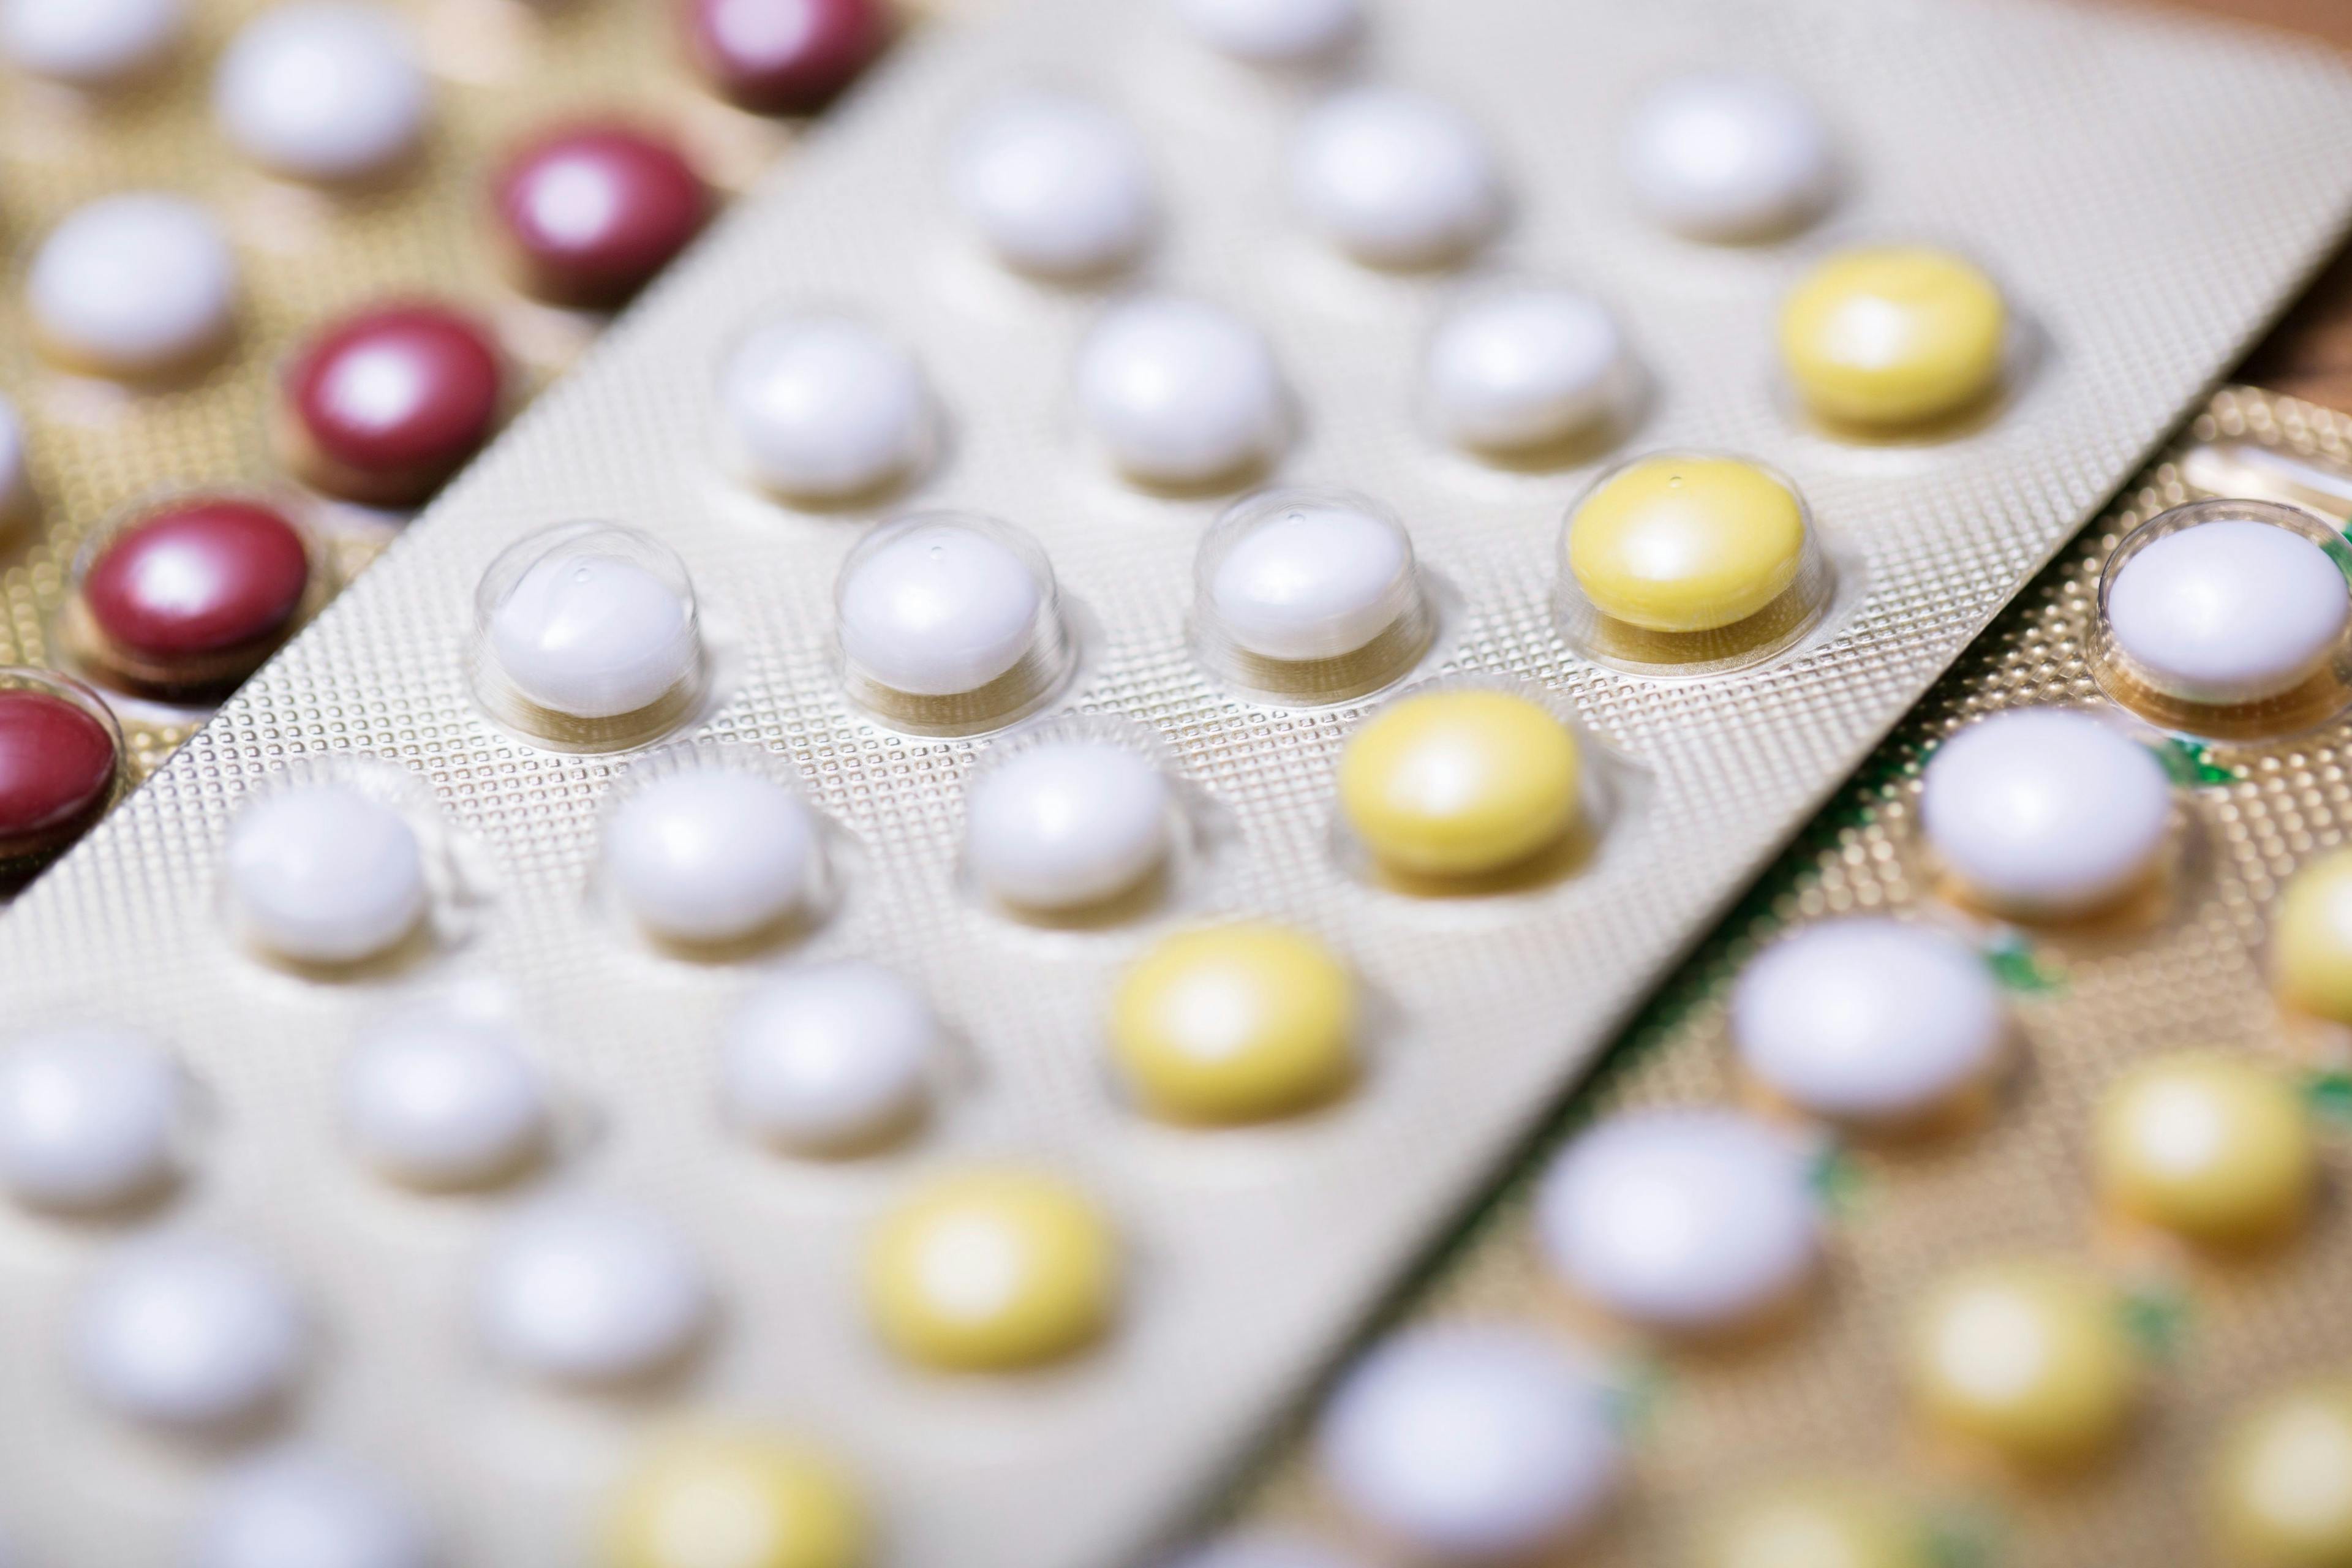 FDA Approves New Oral Contraceptive Nextstellis